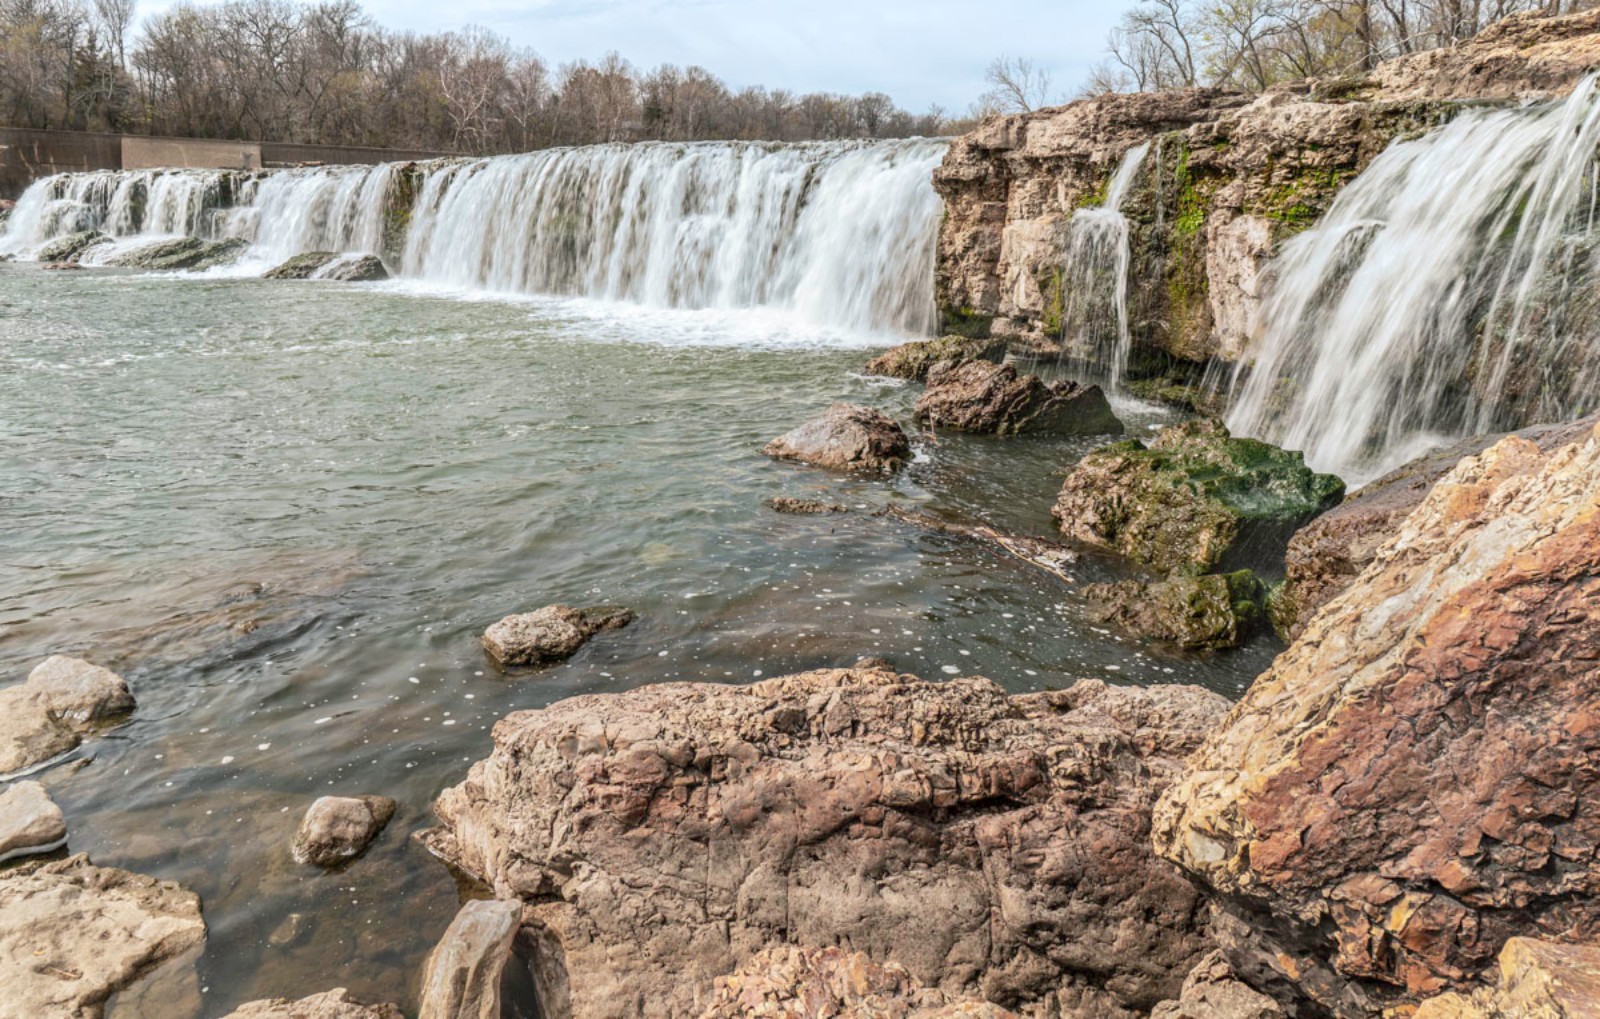 The impressive Grand Falls attracts locals and visitors to enjoy picnicking, splashing and playing. You can see the waterfall from the parking lot and up close by walking down a short dirt path or scrambling over the solid rock bank. (Photo by Sony Hocklander)